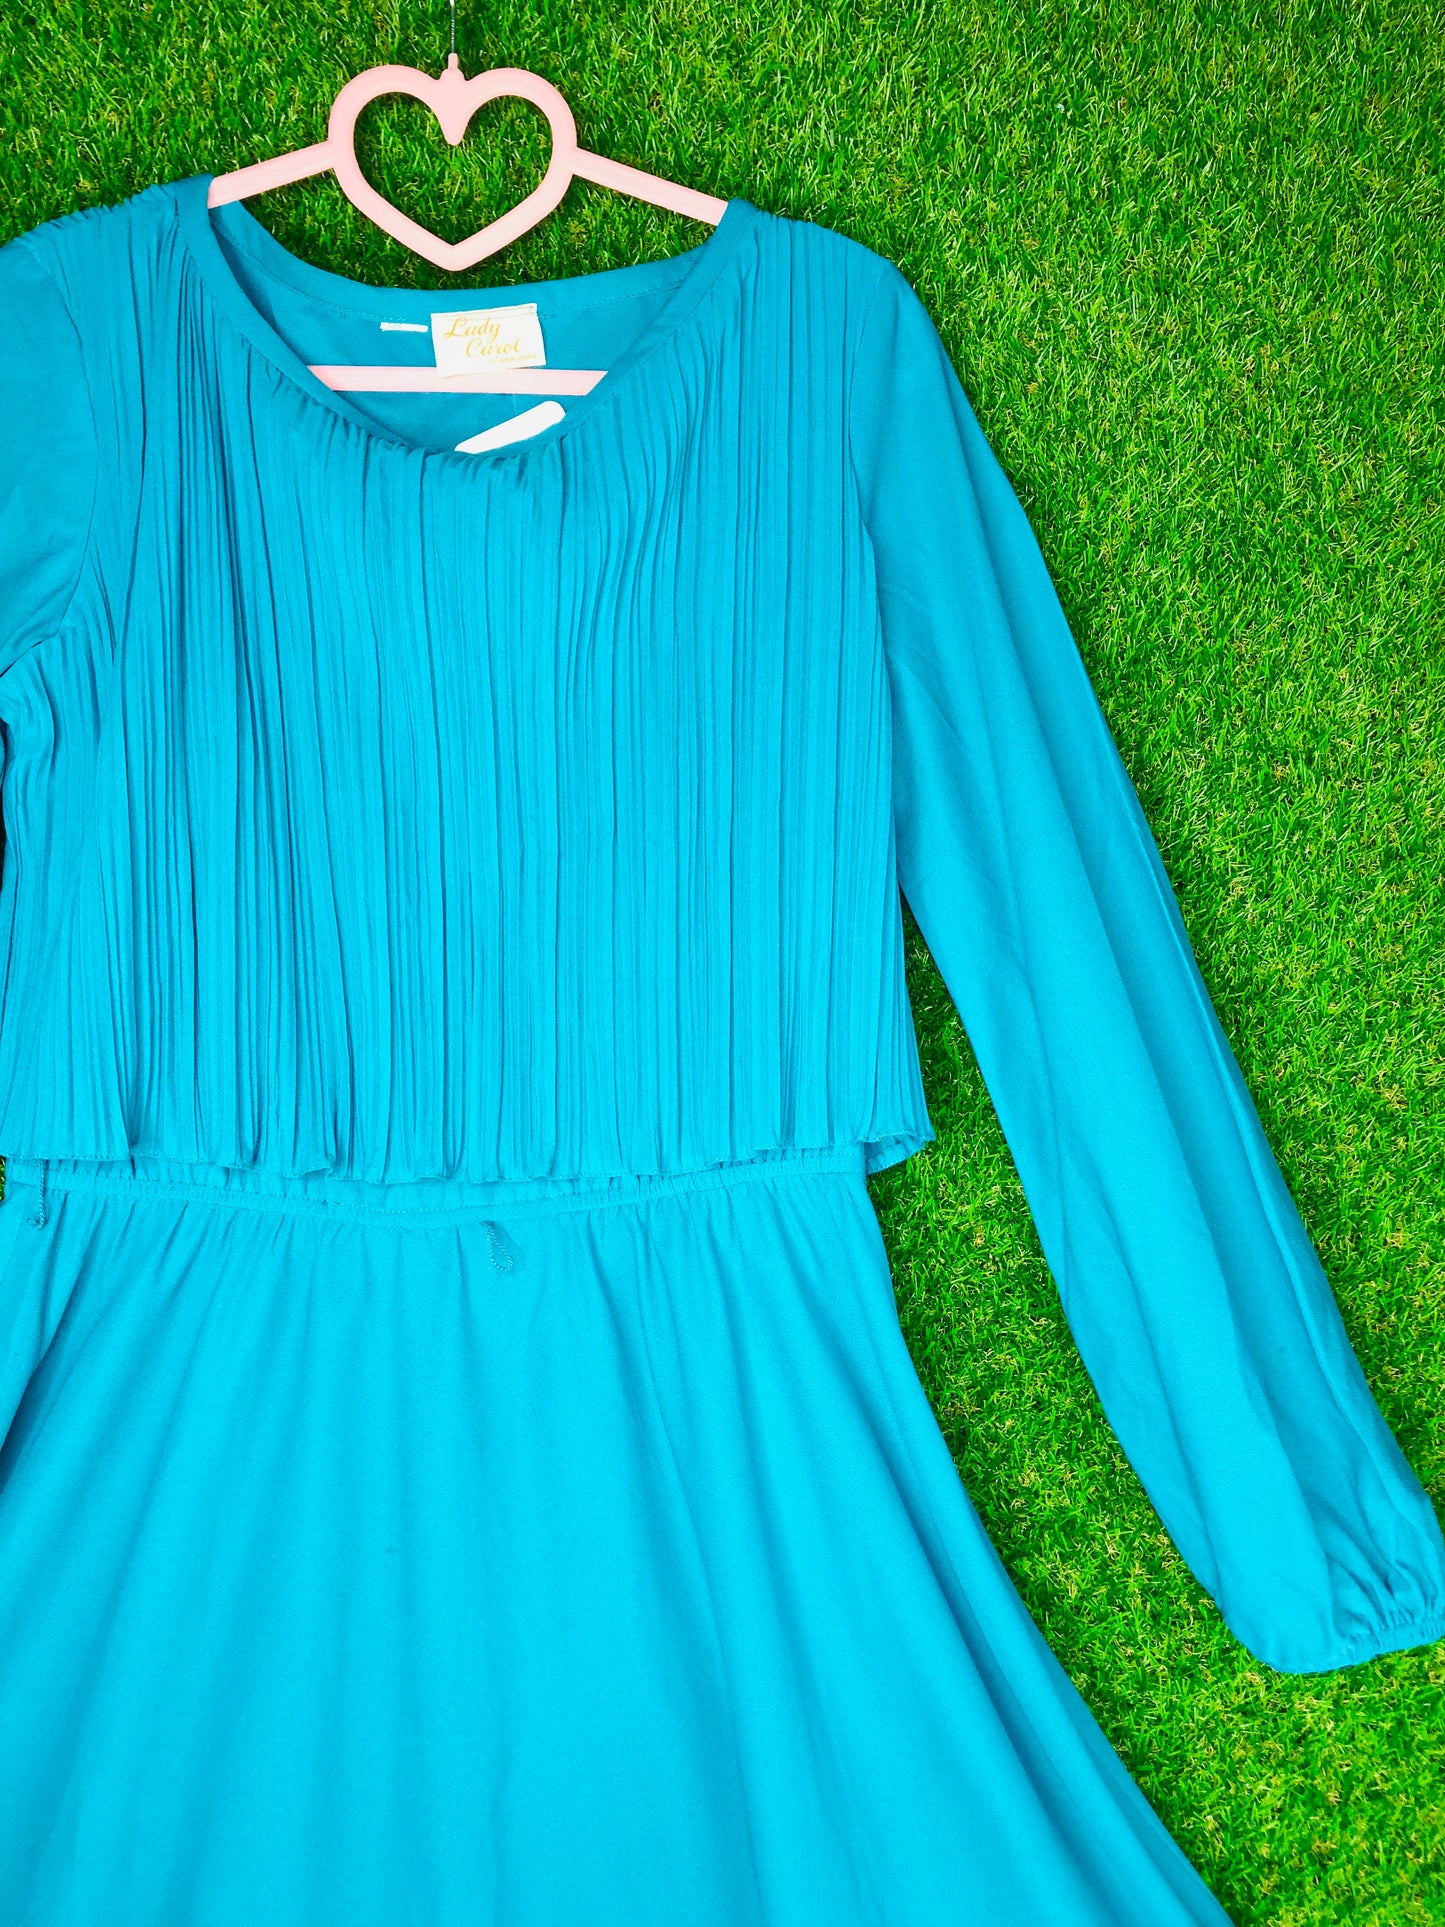 1980's Teal Volup Dress With Elastic Waist